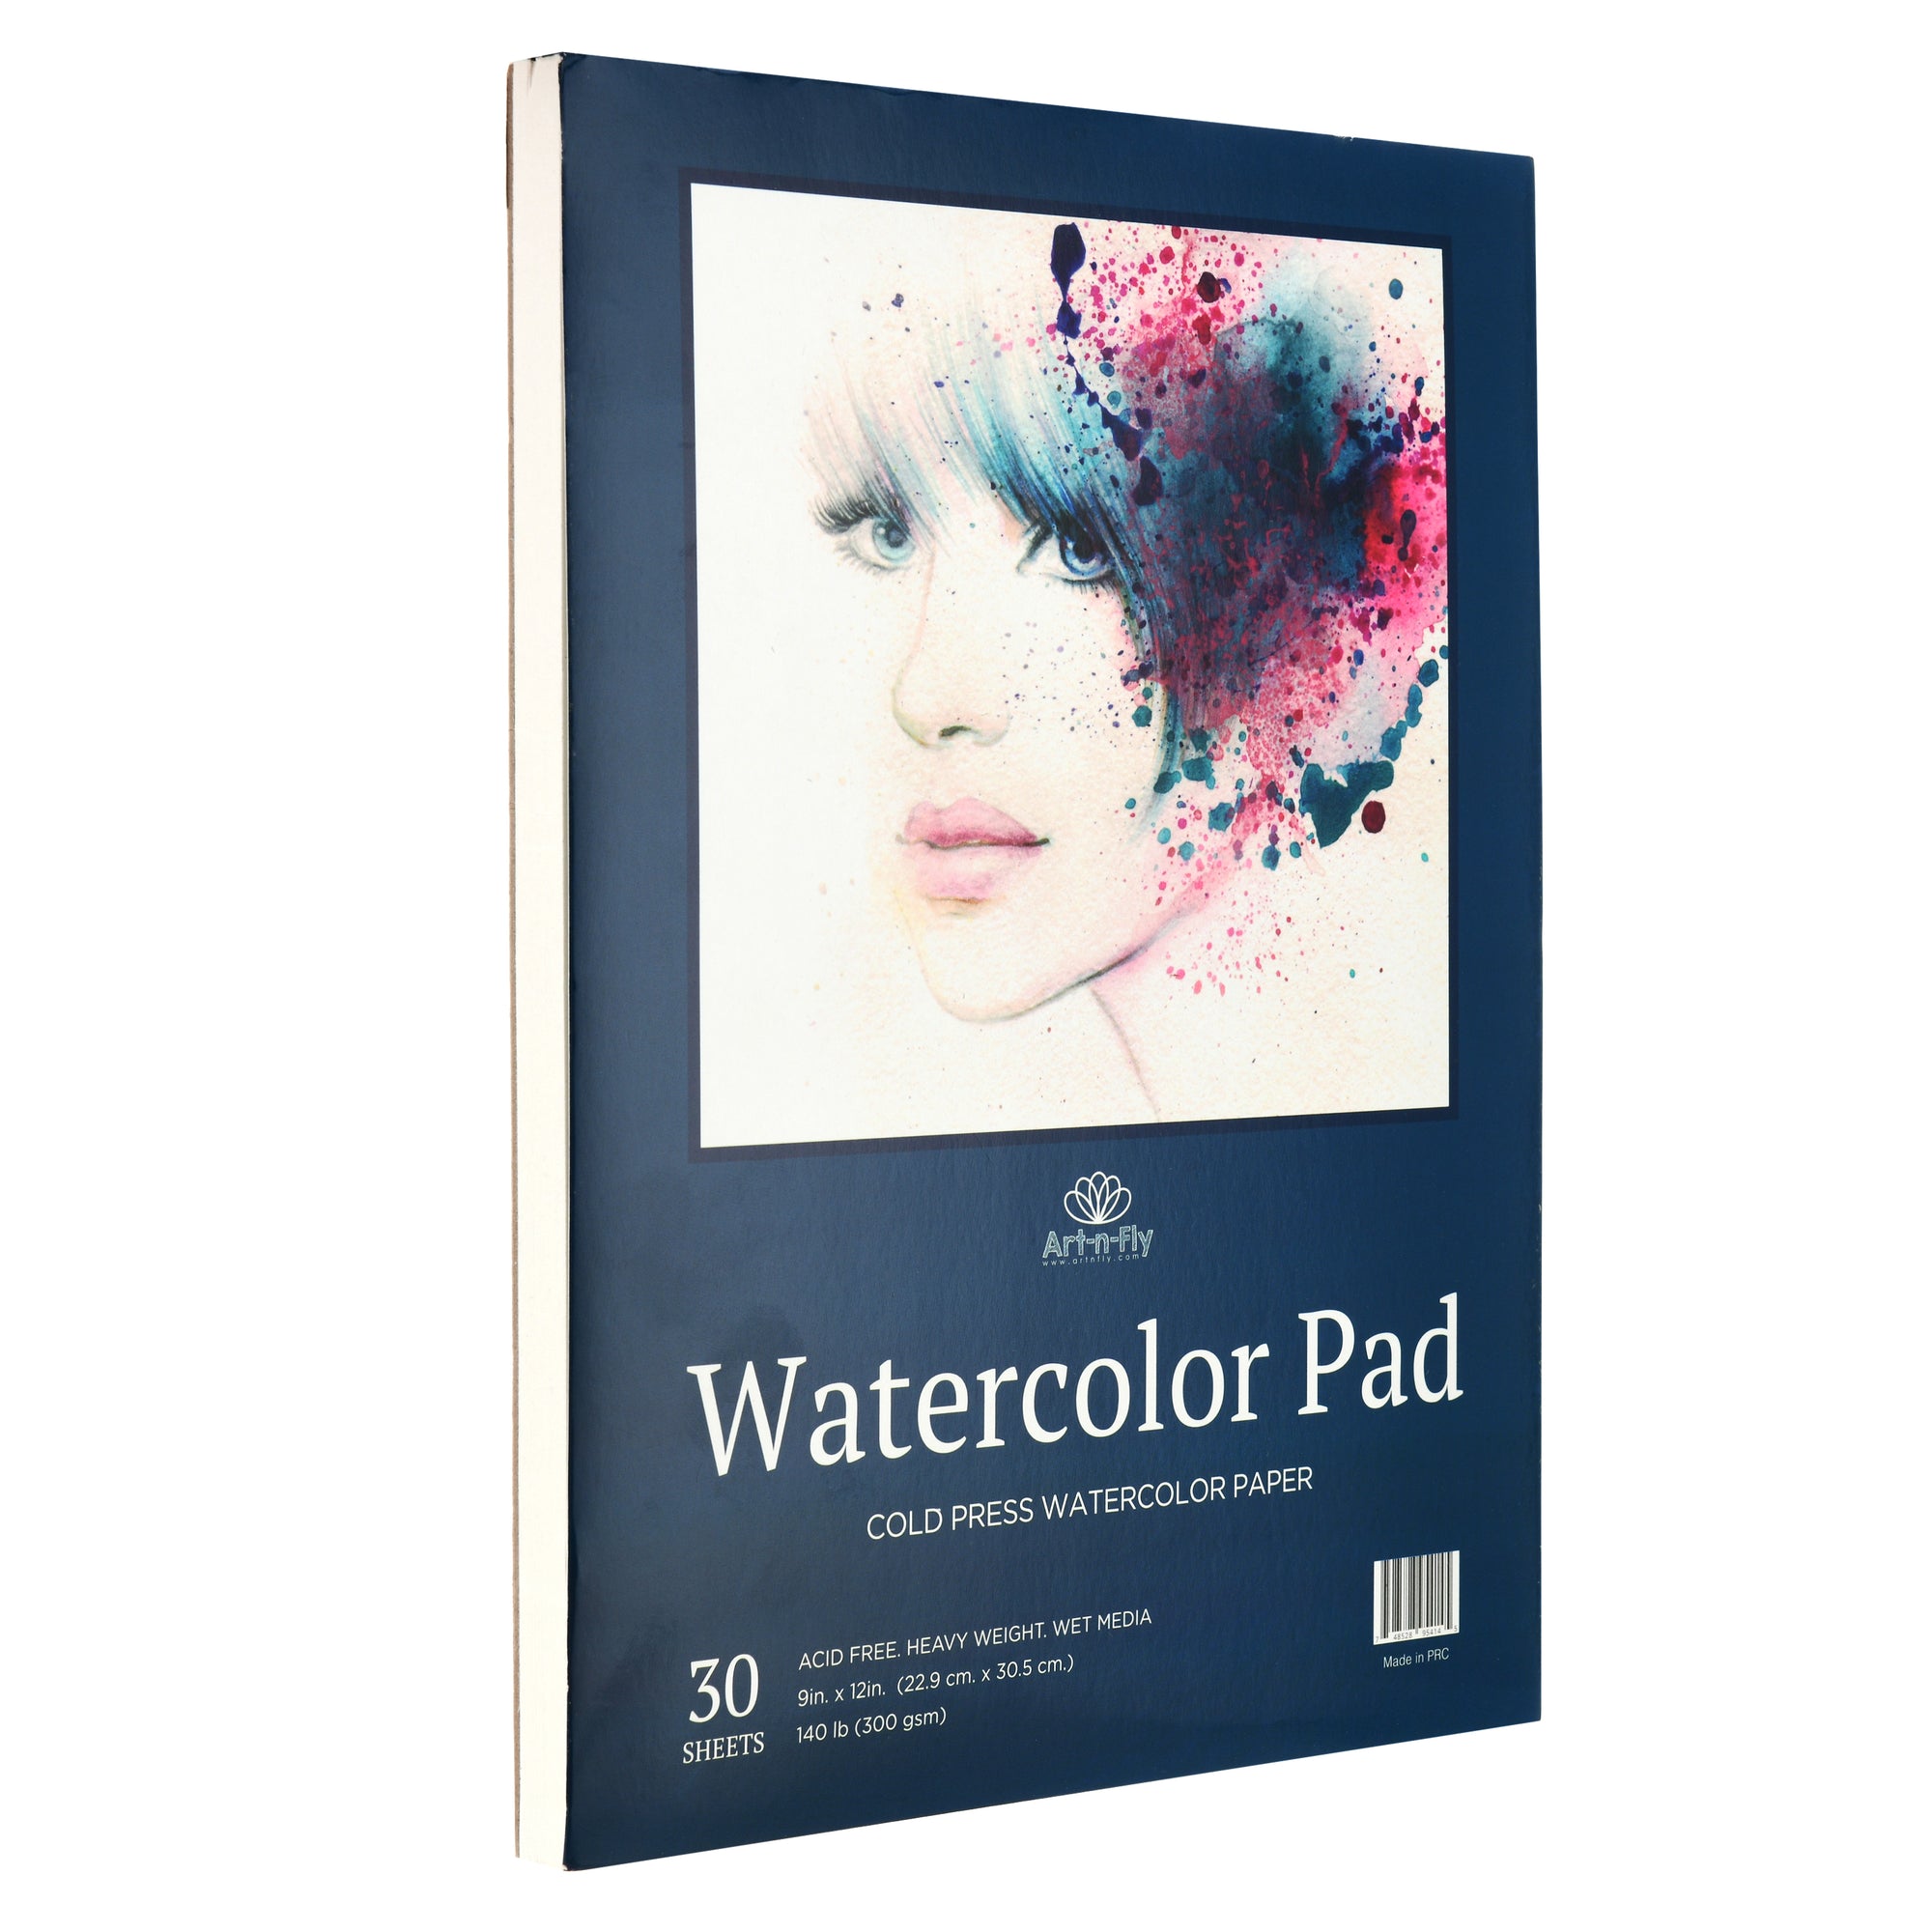 Watercolour Paper - BLOCK - Hahnemuhle - EXPRESSION - 300gsm (140lb) - –  WoW Art Supplies